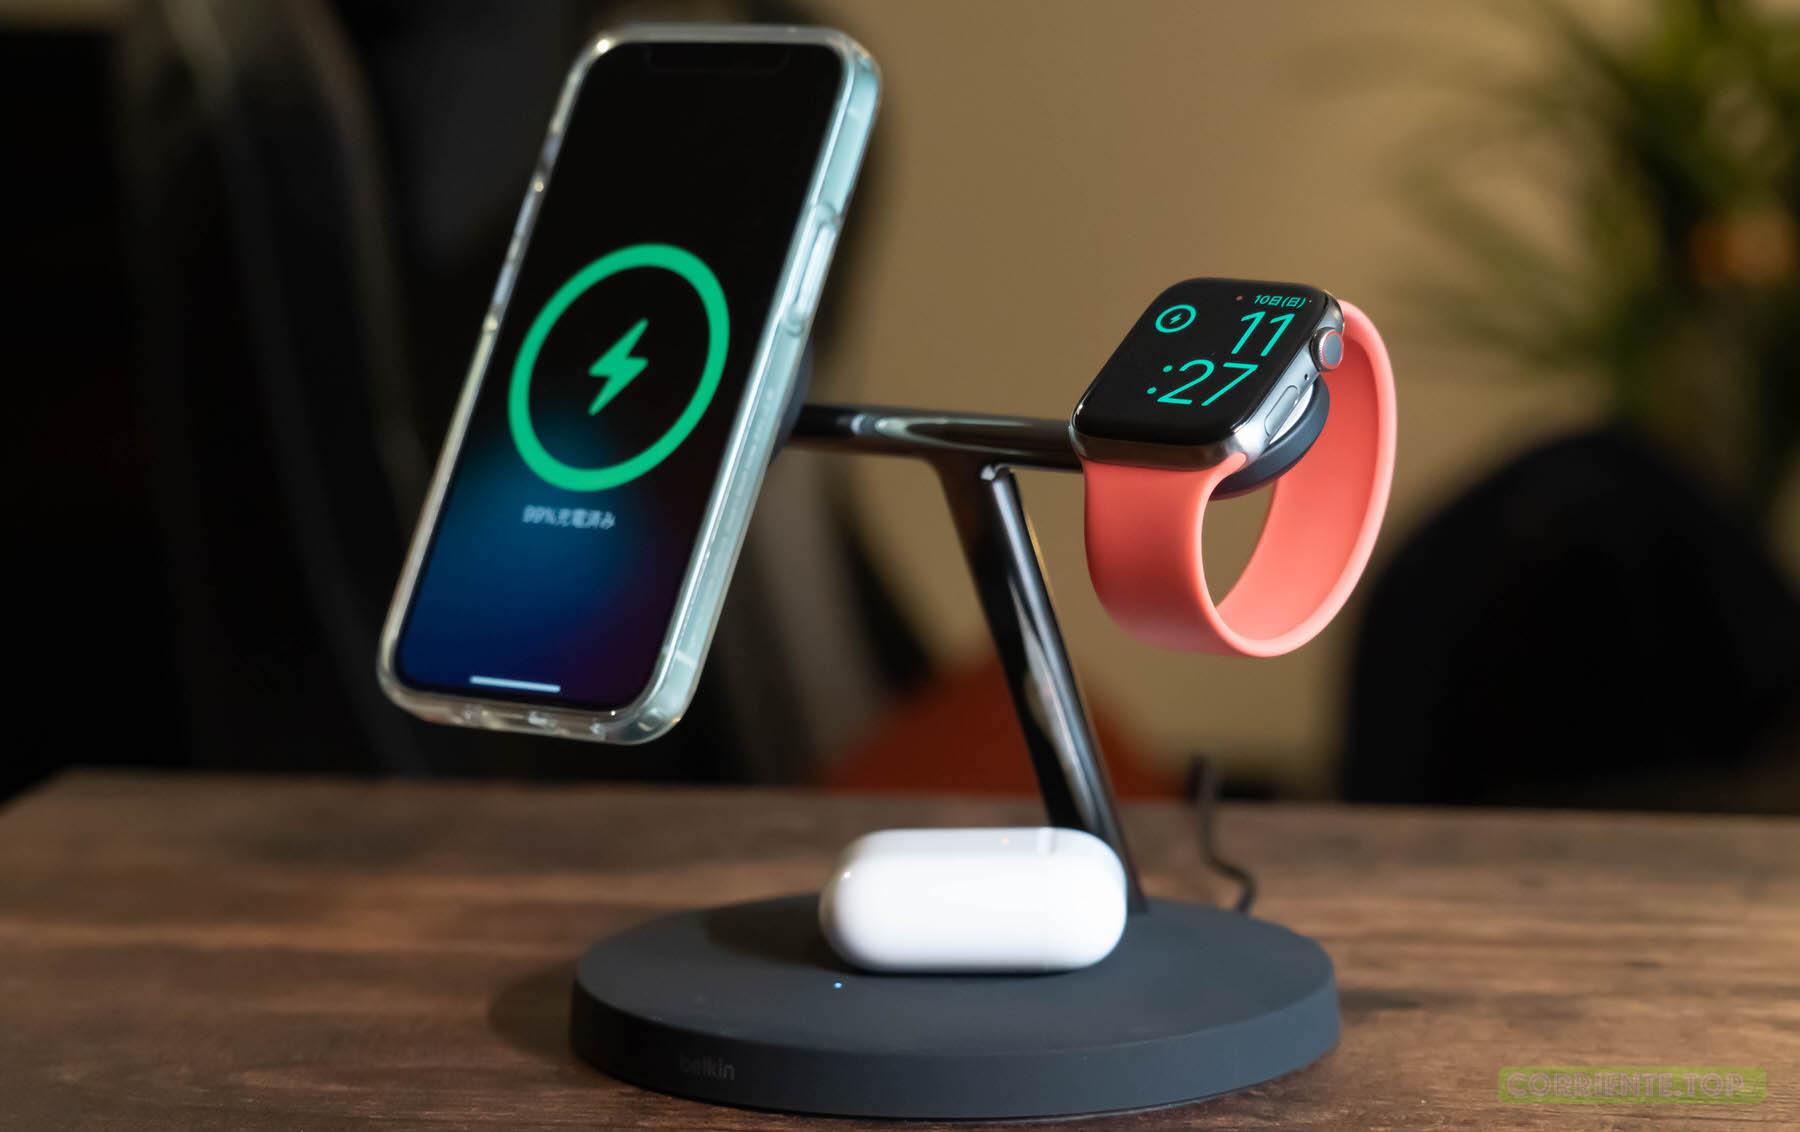 Belkinの3in1ワイヤレス充電器 ｢BOOST↑CHARGE PRO 3-in-1 Wireless Charger with MagSafe｣  レビュー | CoRRiENTE.top